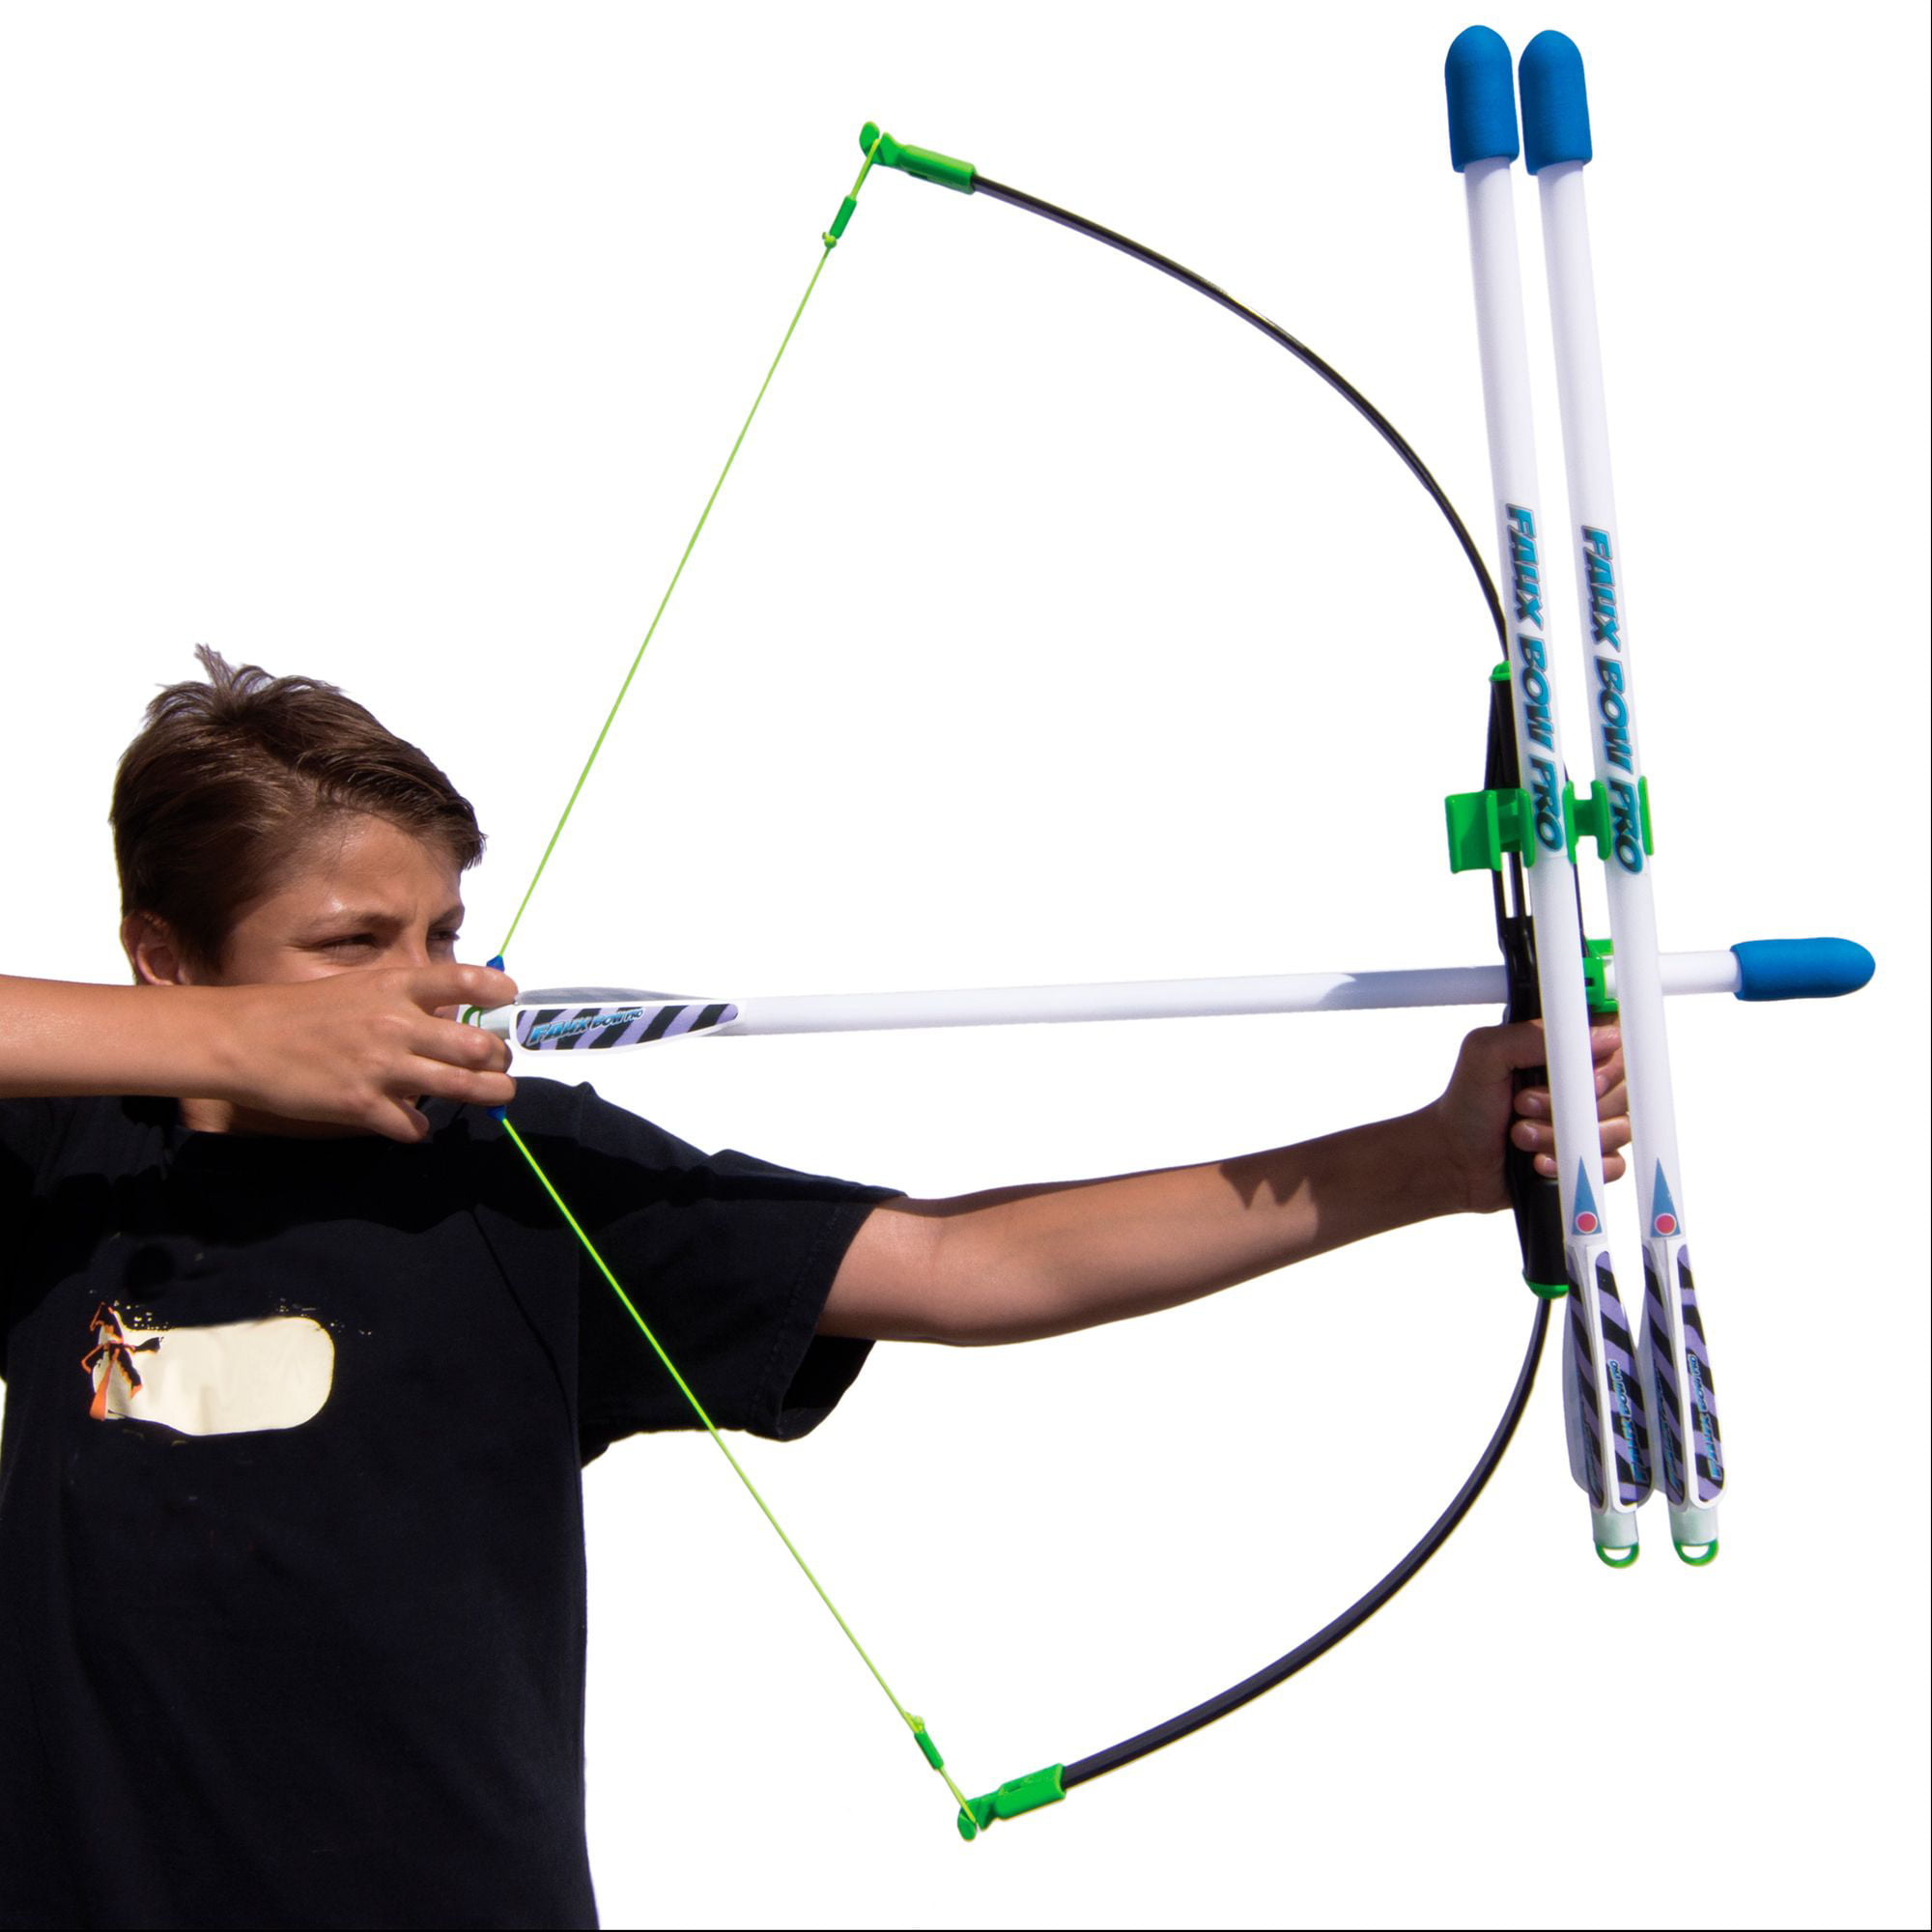 Marky Sparky Faux Bow Pro Shoots Over 200 Feet and Patented Arrow Archery Set for sale online 